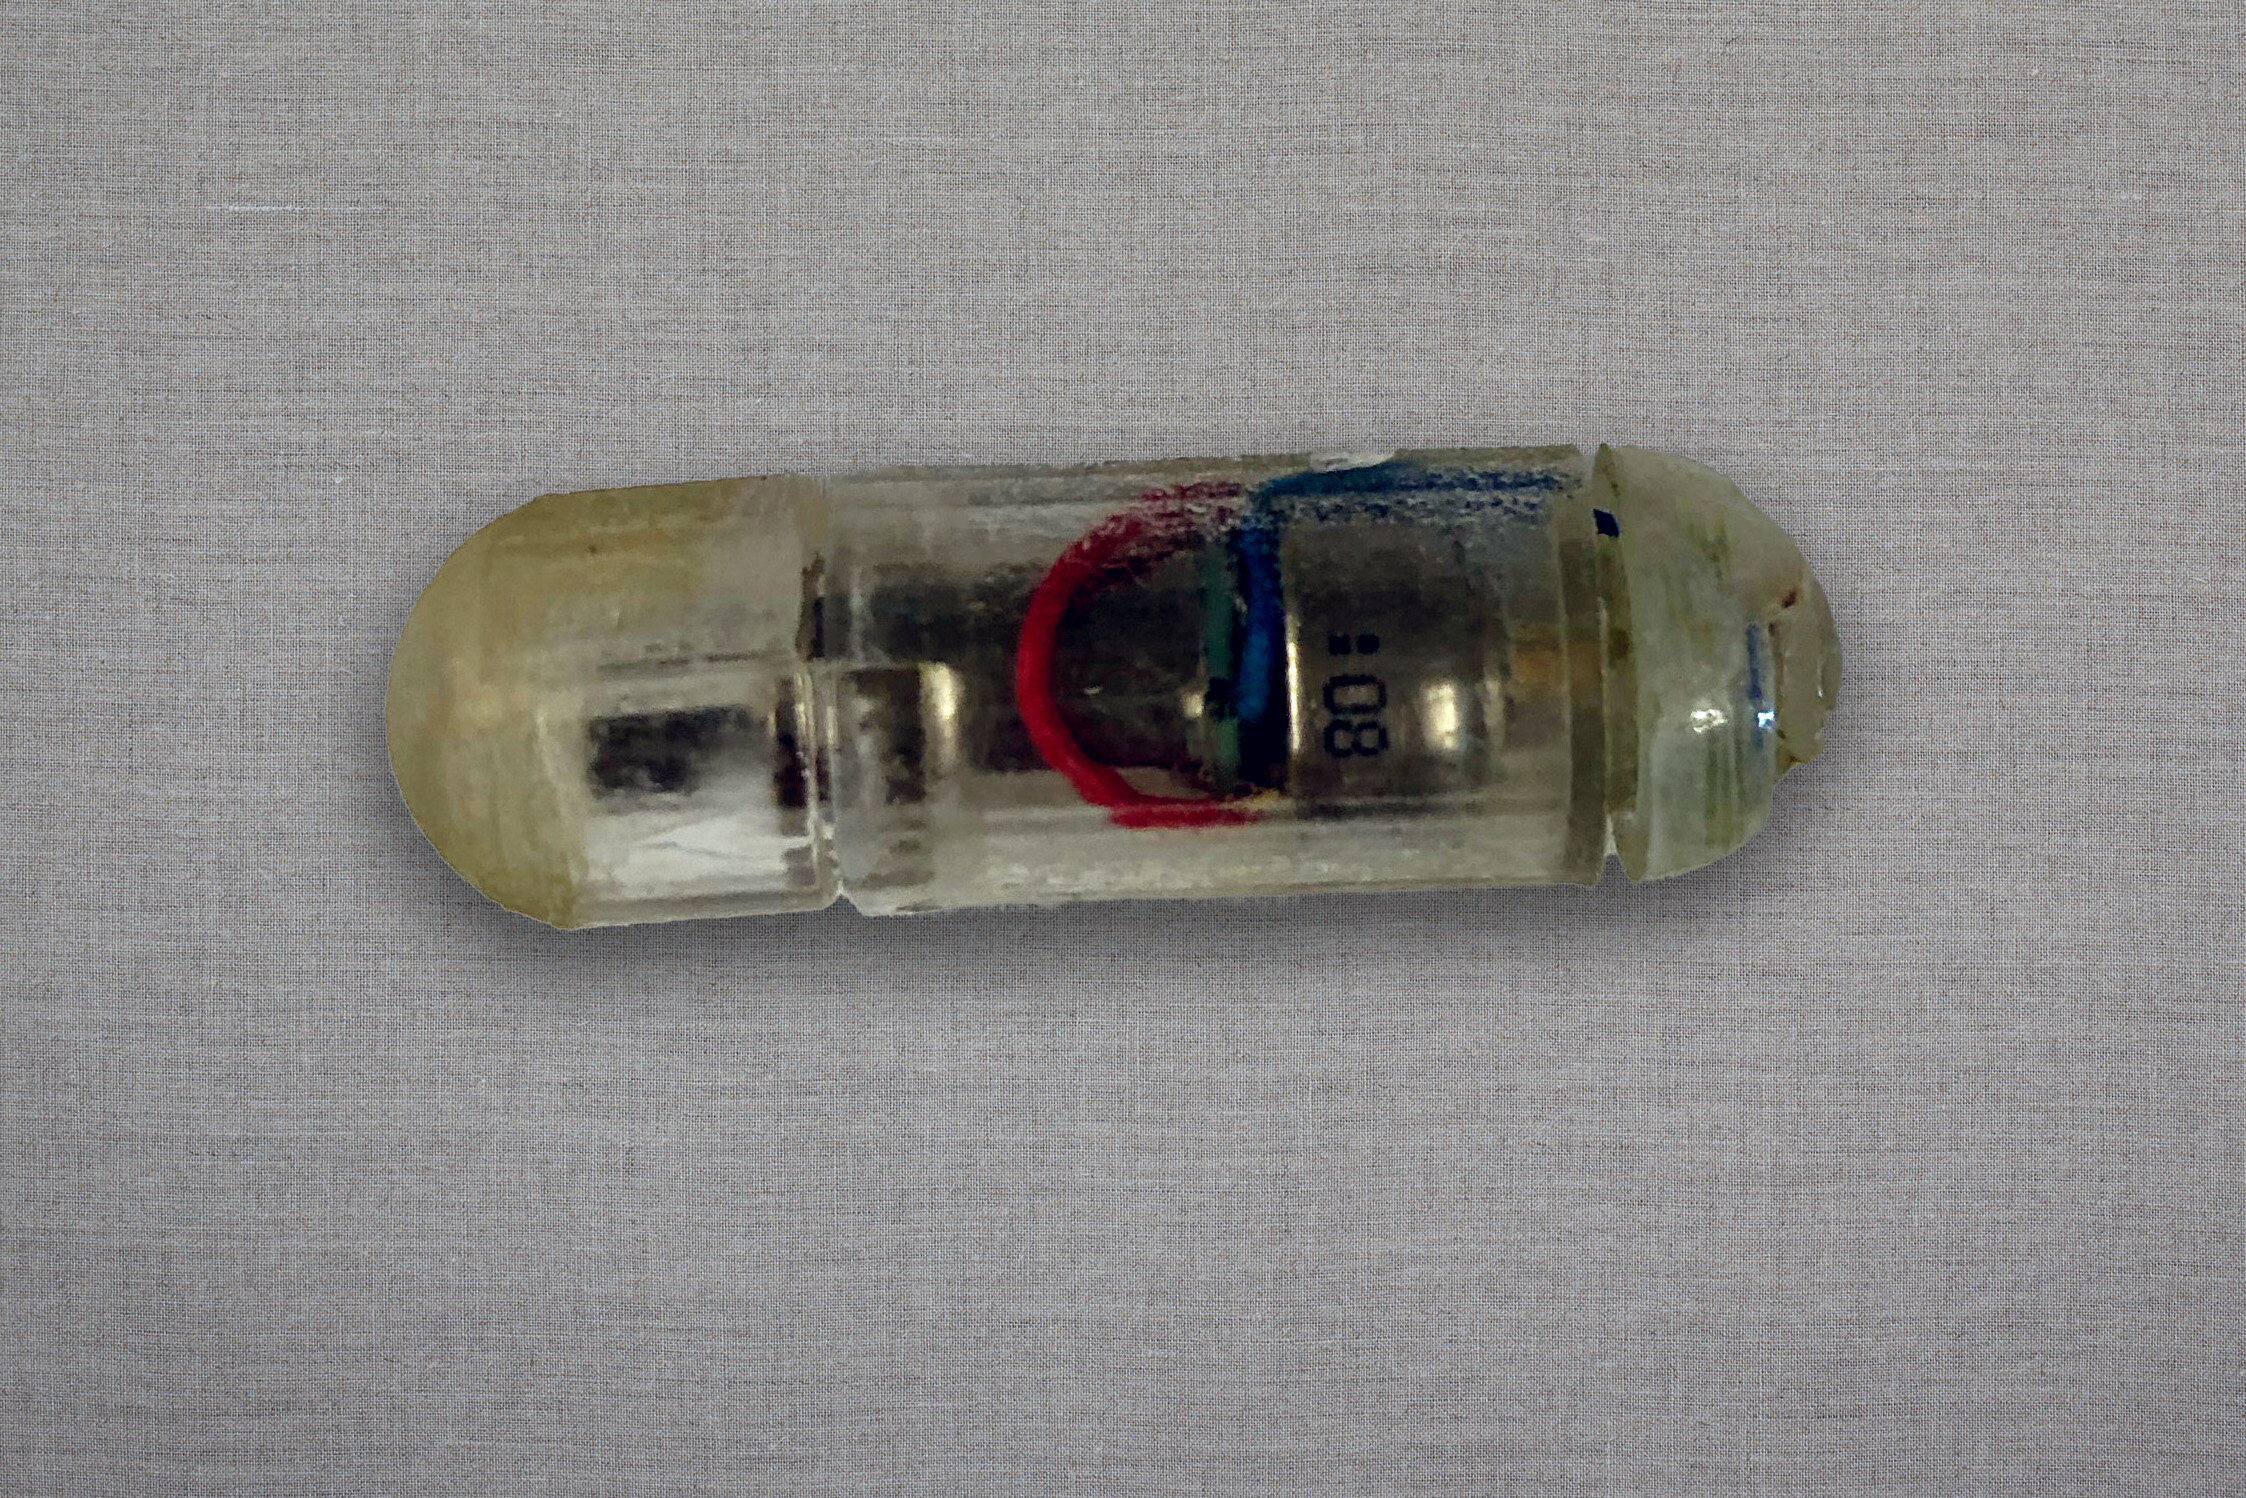 Ingestible electronic device detects breathing depression in patients, MIT  News